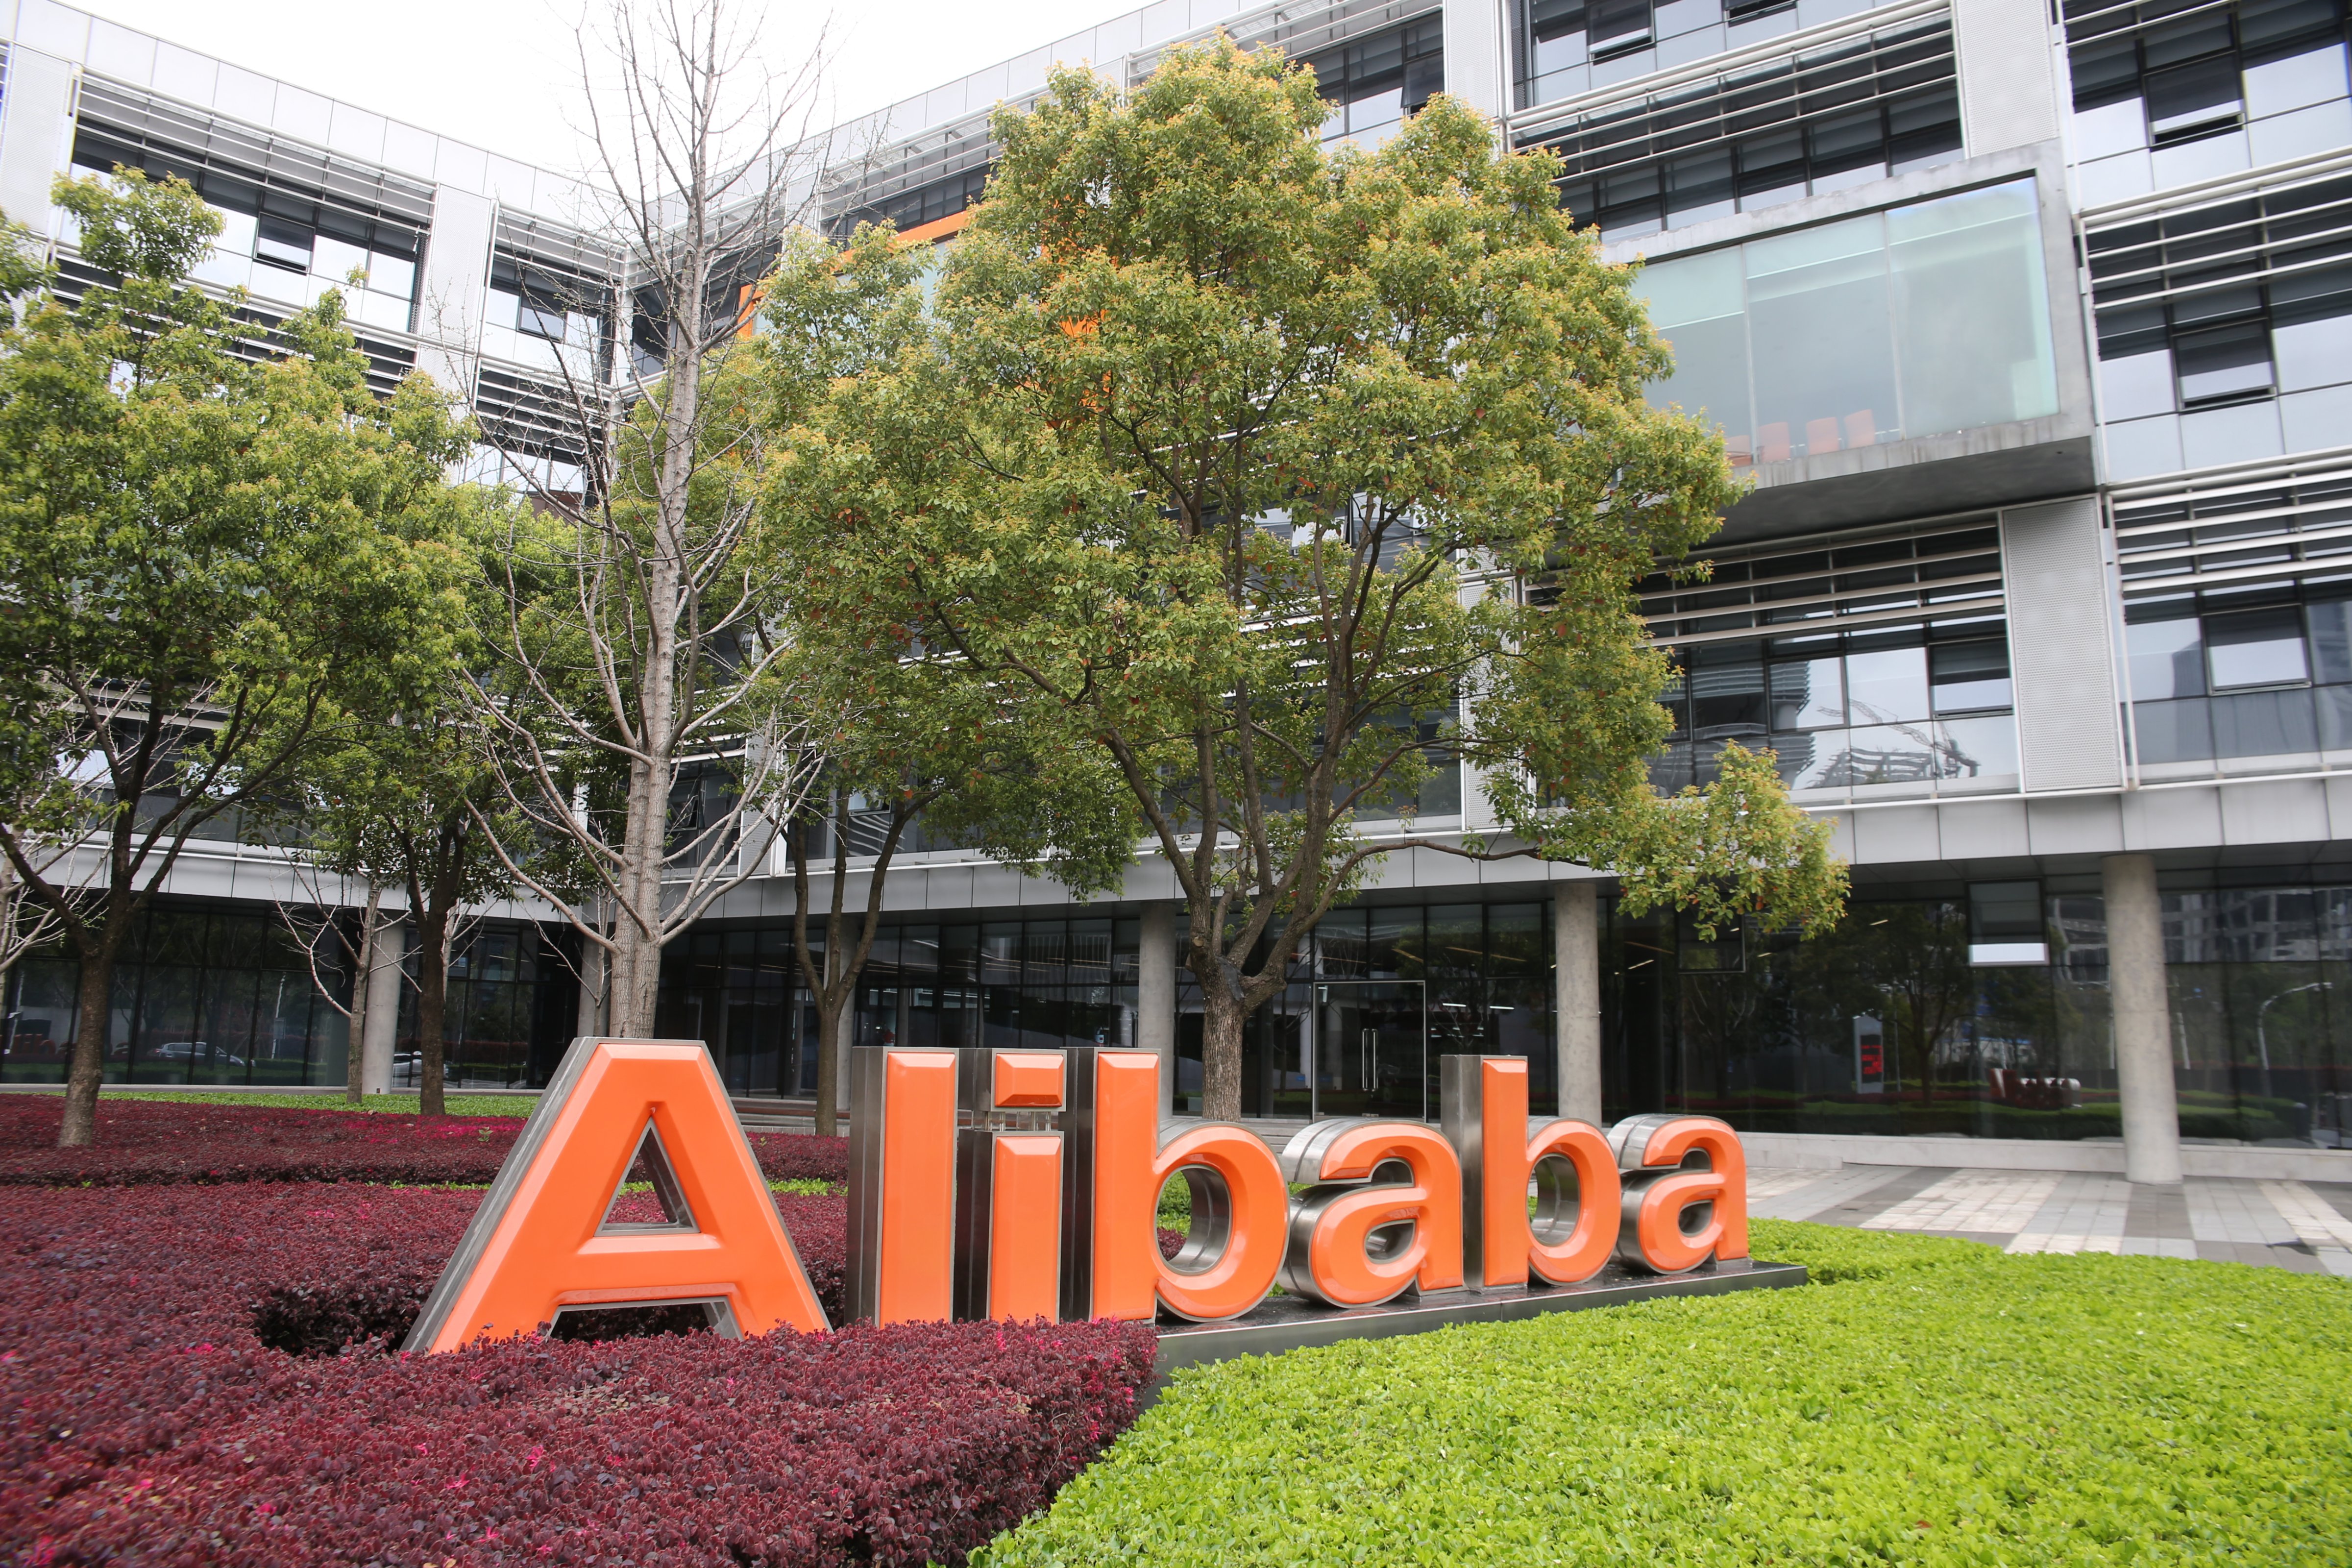 Alibaba Group headquarters on March 29, 2014 in Hangzhou, China. (Hong Wu—Getty Images)